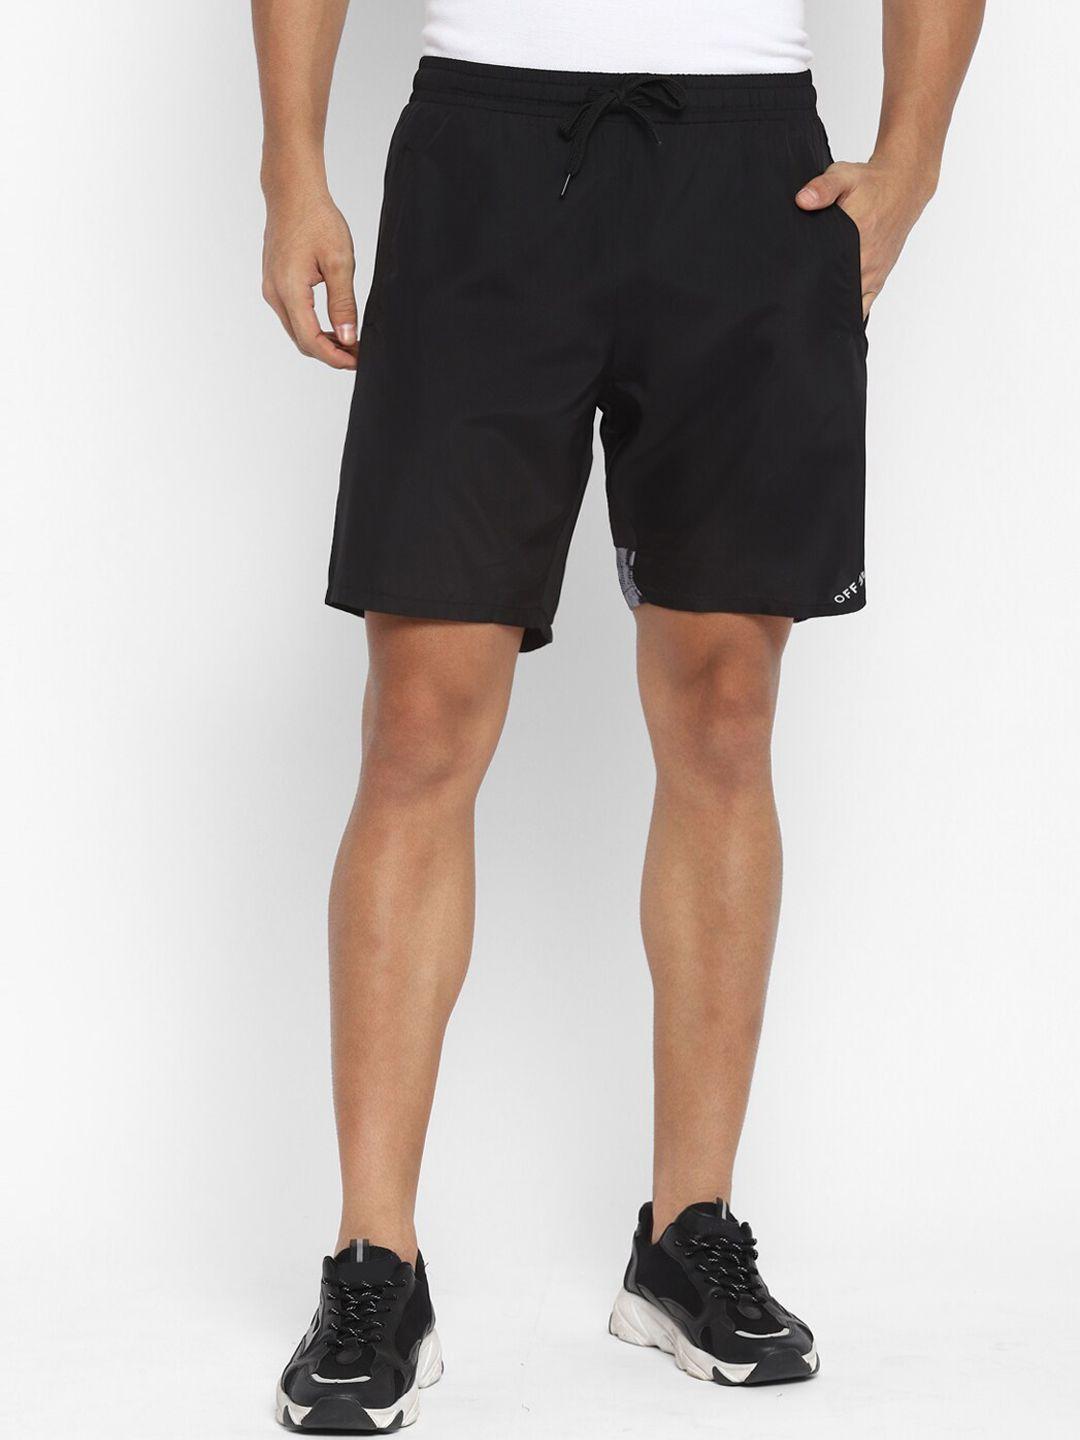 off limits men black solid training or gym sports shorts